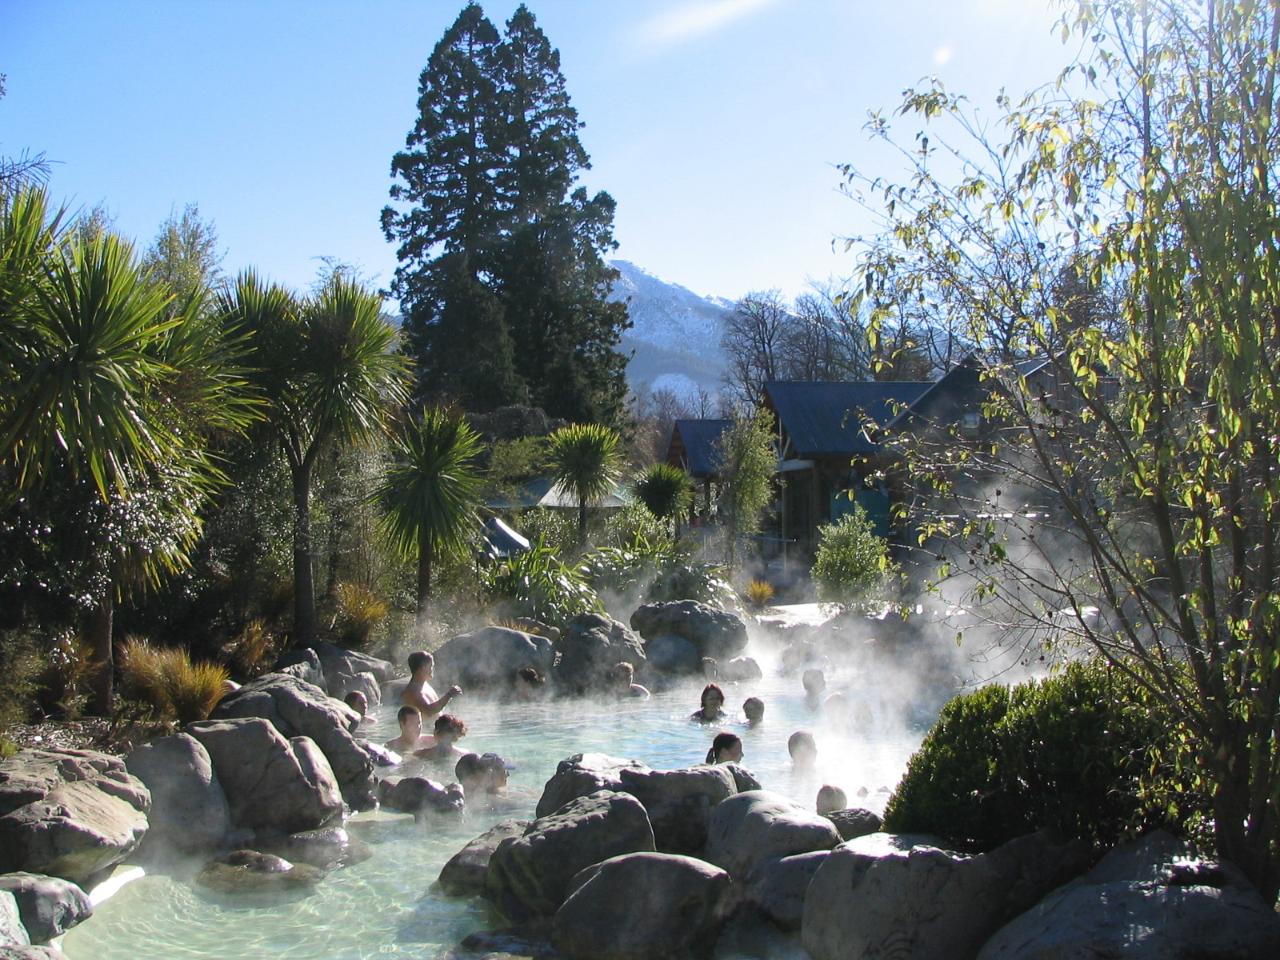 Hanmer Springs Day Tour From Christchurch With Bungy (Small Group, Carbon Neutral)